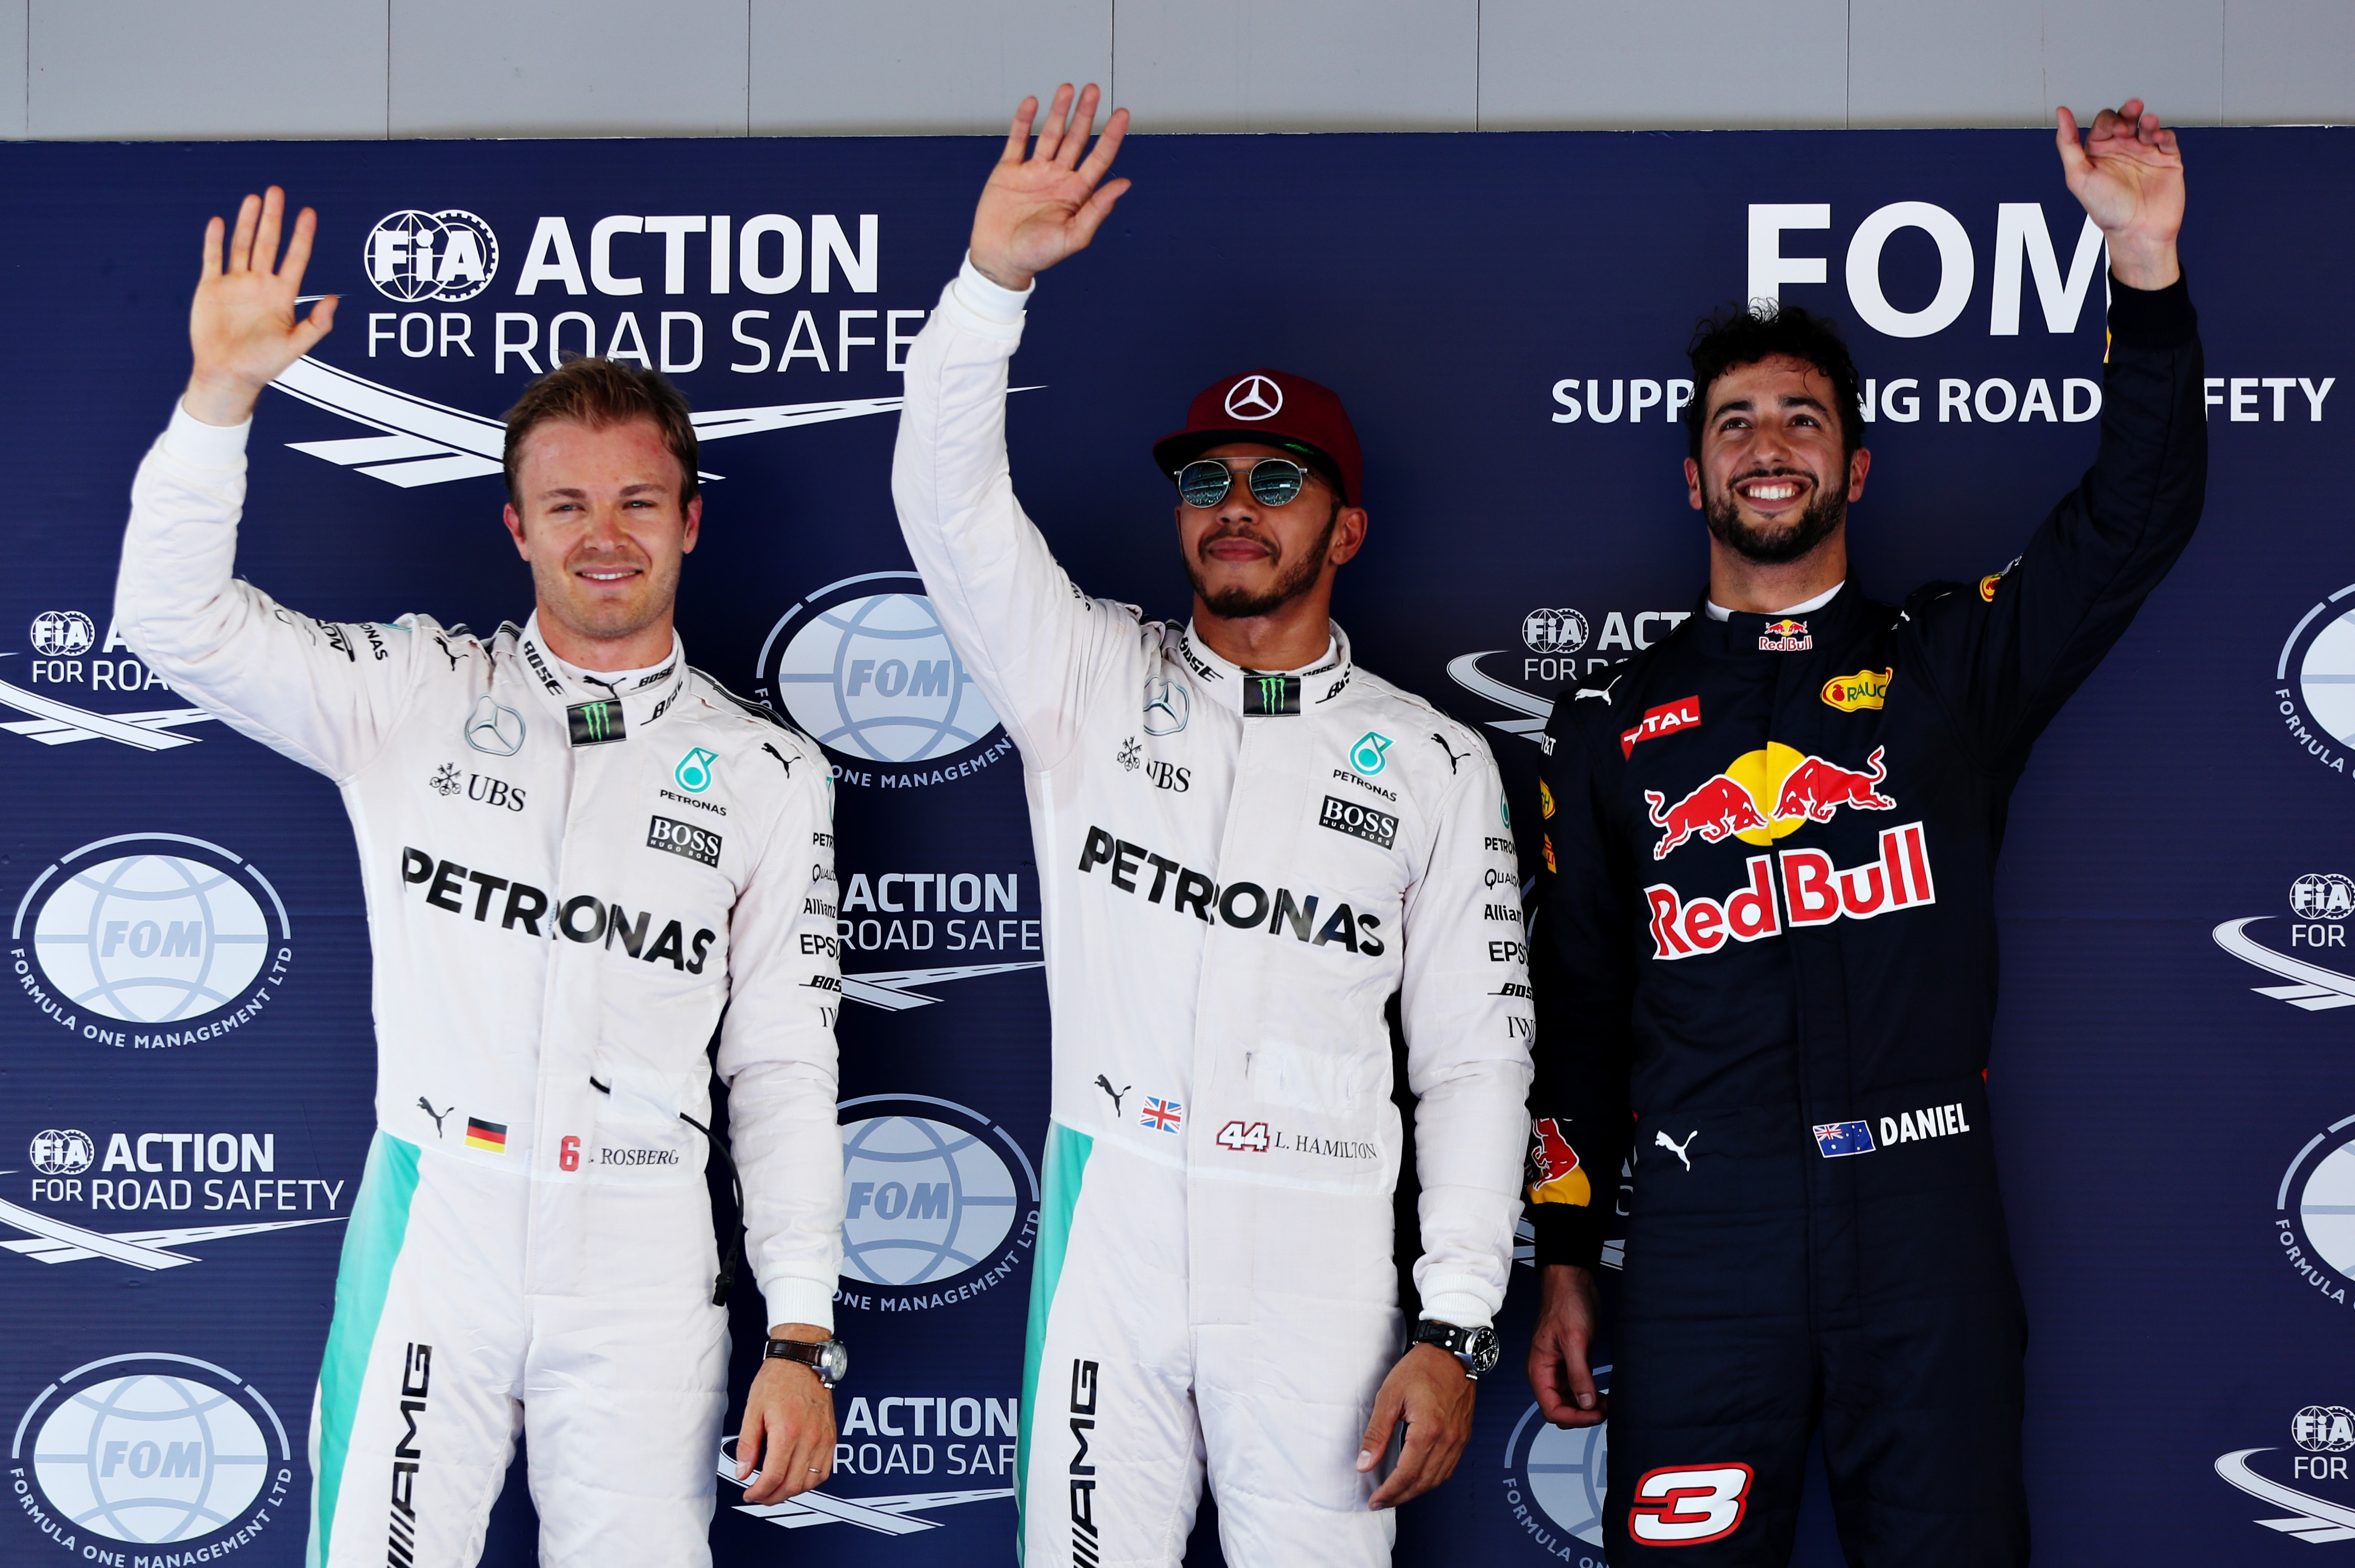 Top three qualifiers from the 2016 Spanish Grand Prix